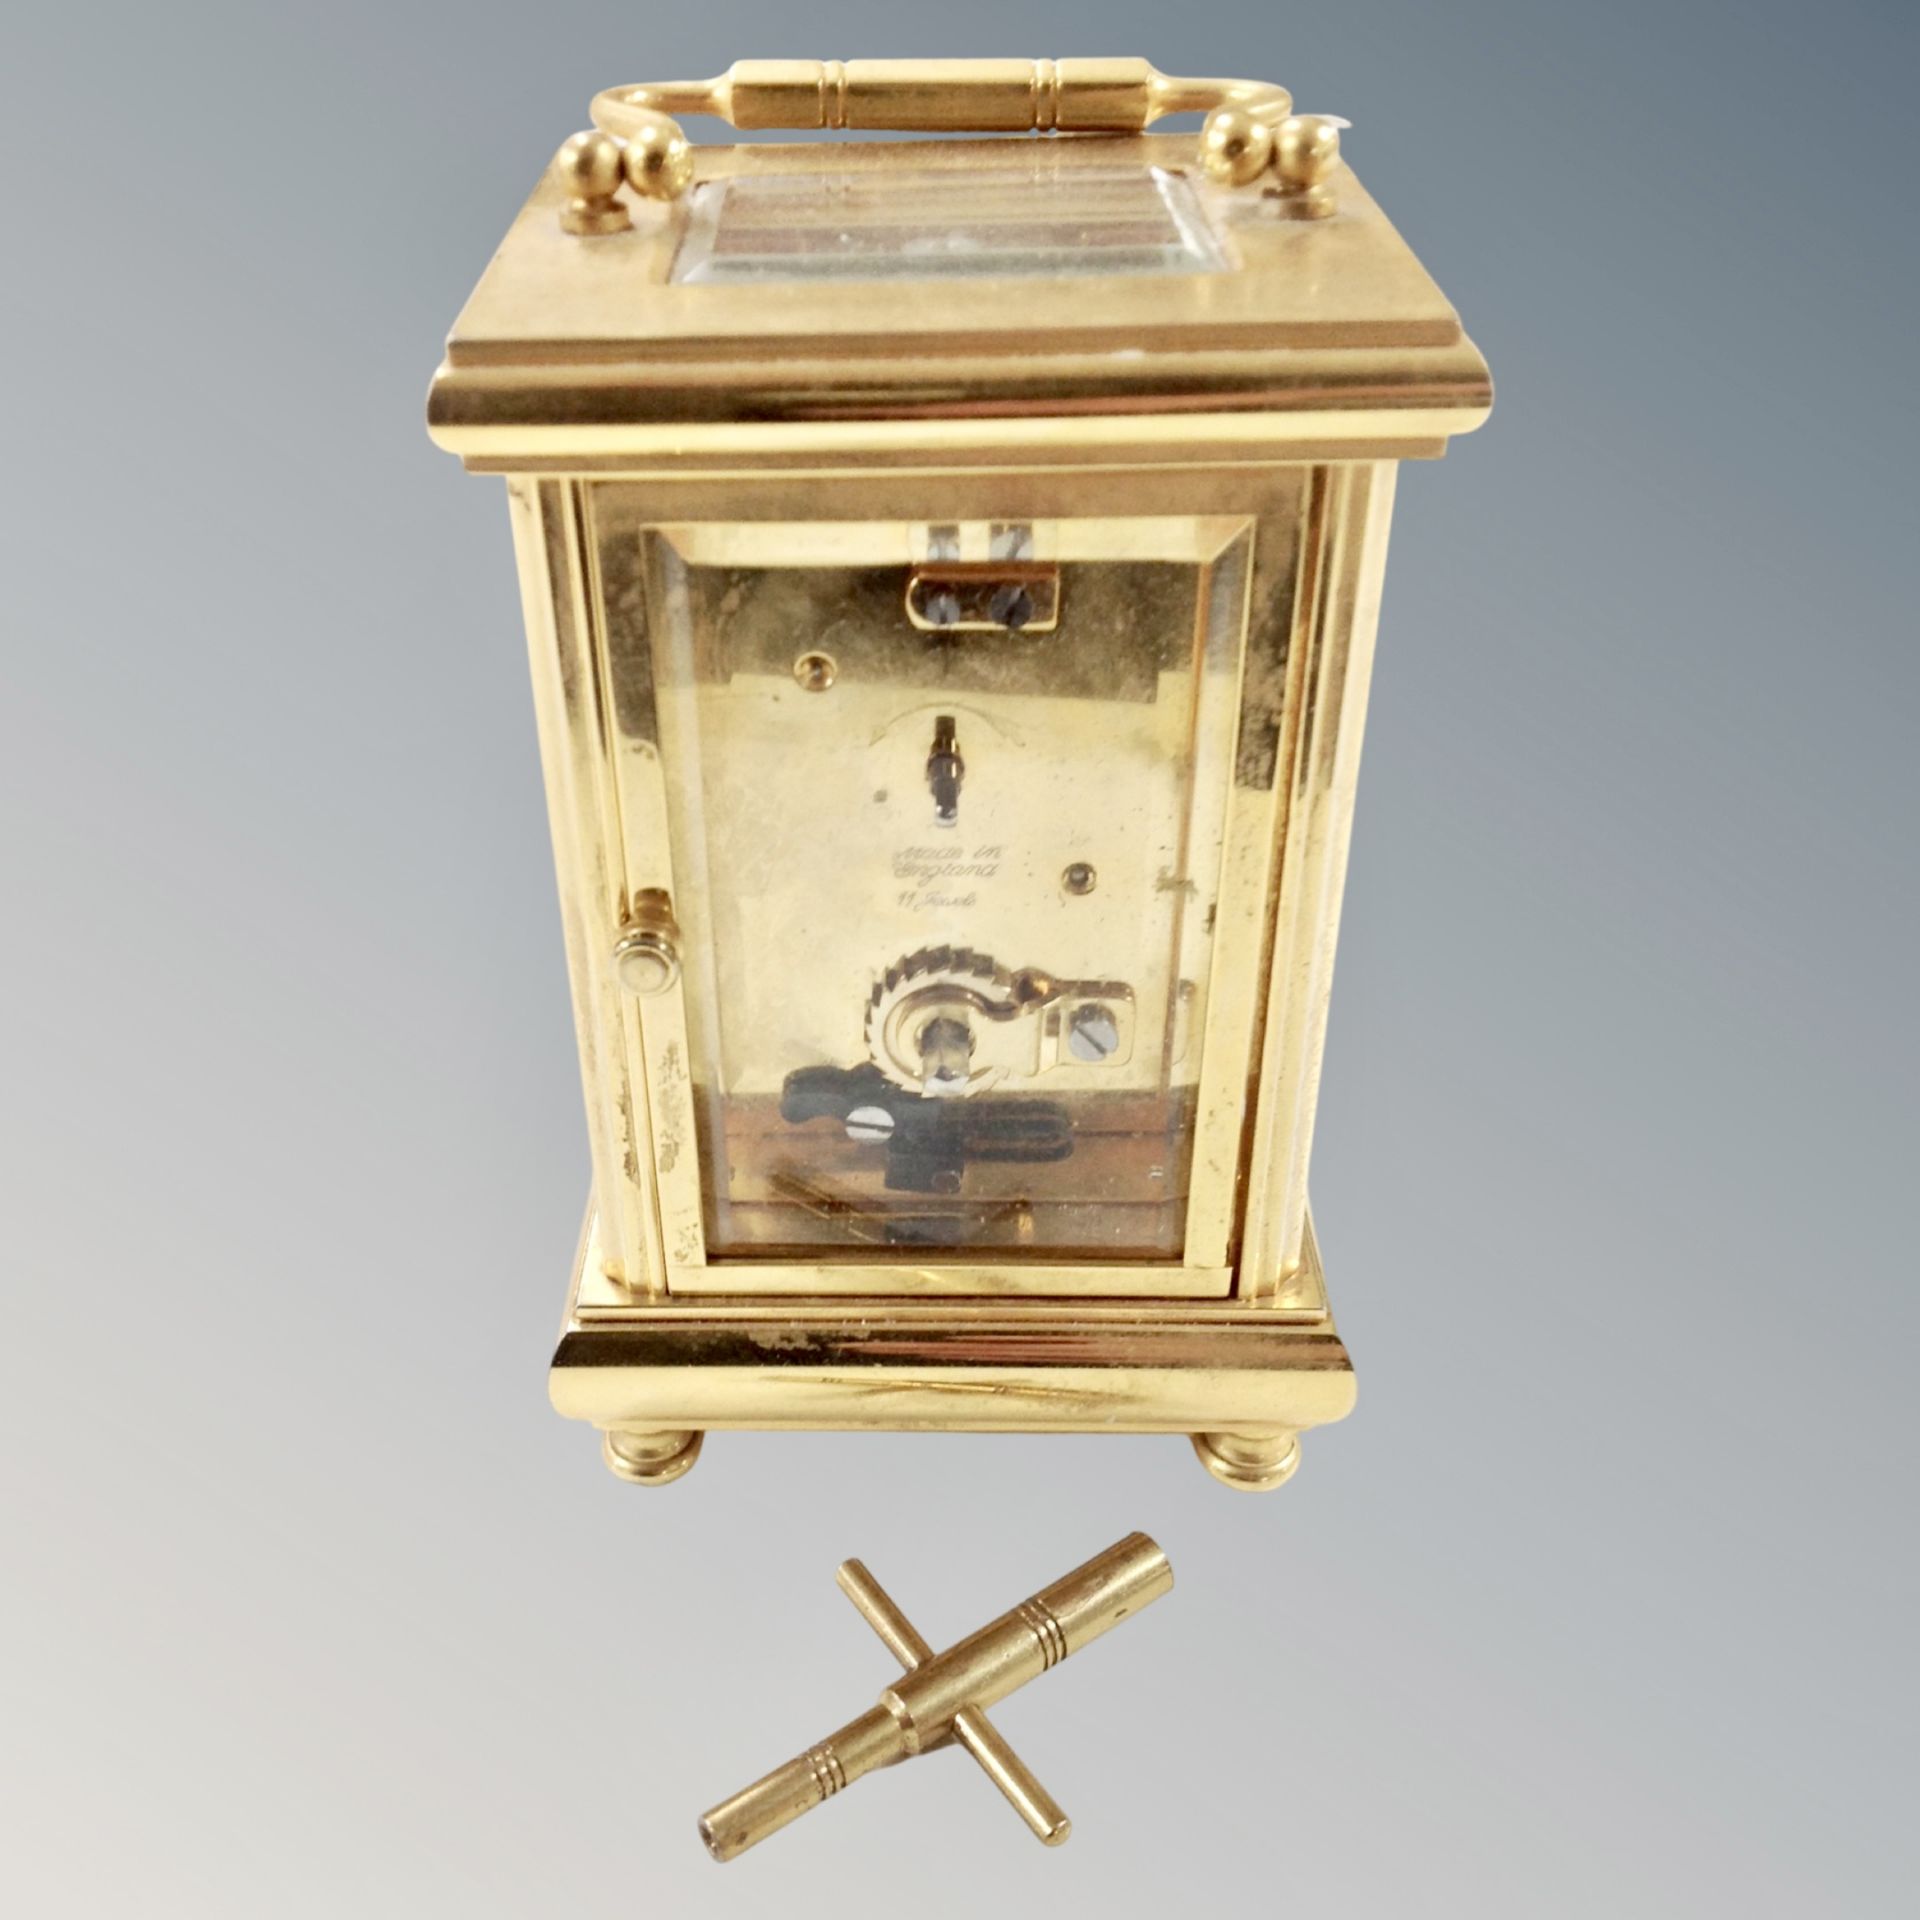 A brass eleven jewel carriage clock with key - Image 2 of 2